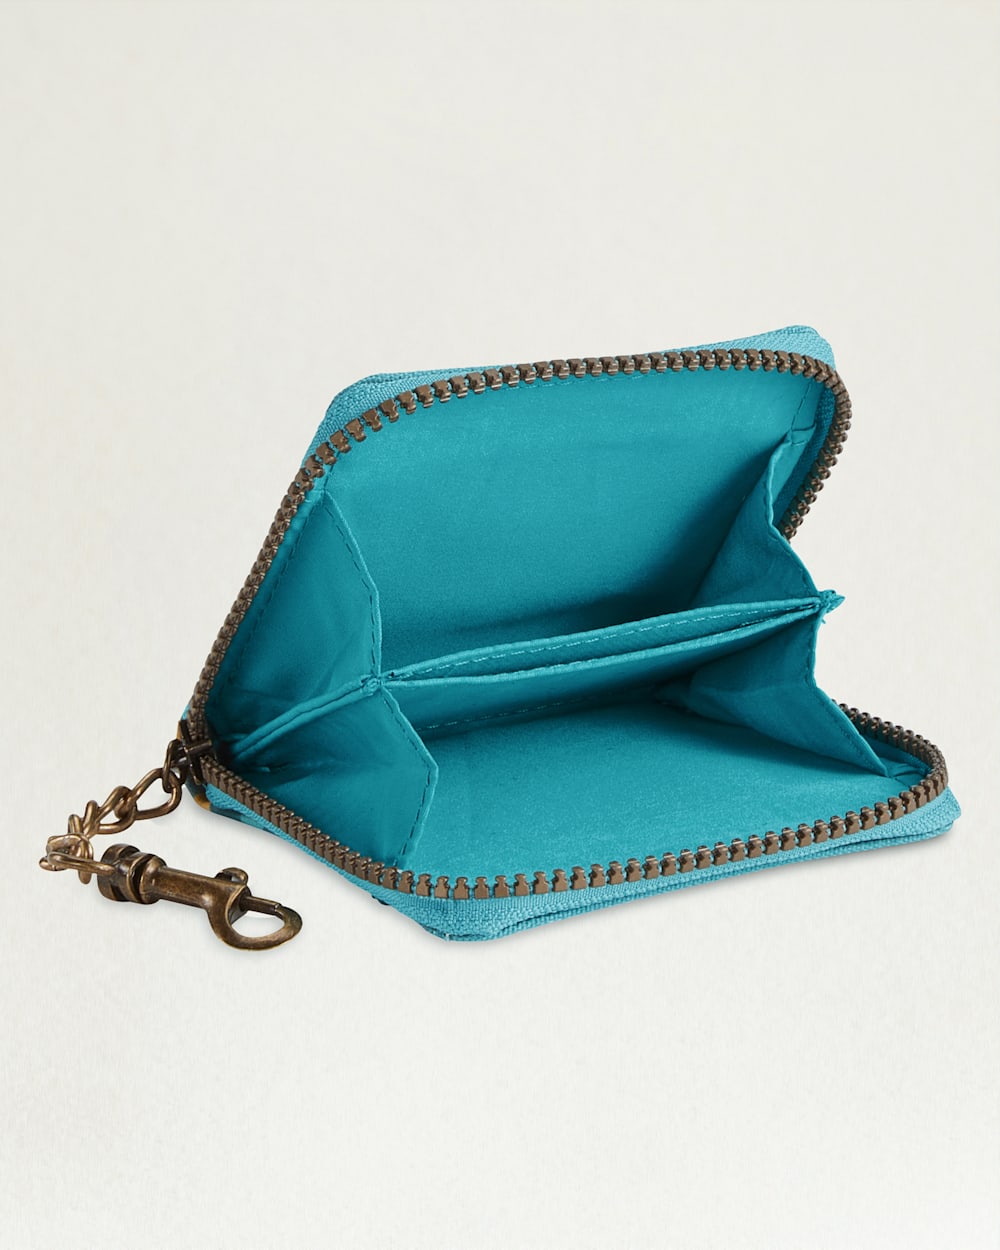 ALTERNATE VIEW OF SUMMERLAND BRIGHT CANOPY CANVAS KEYCHAIN WALLET IN TURQUOISE image number 3